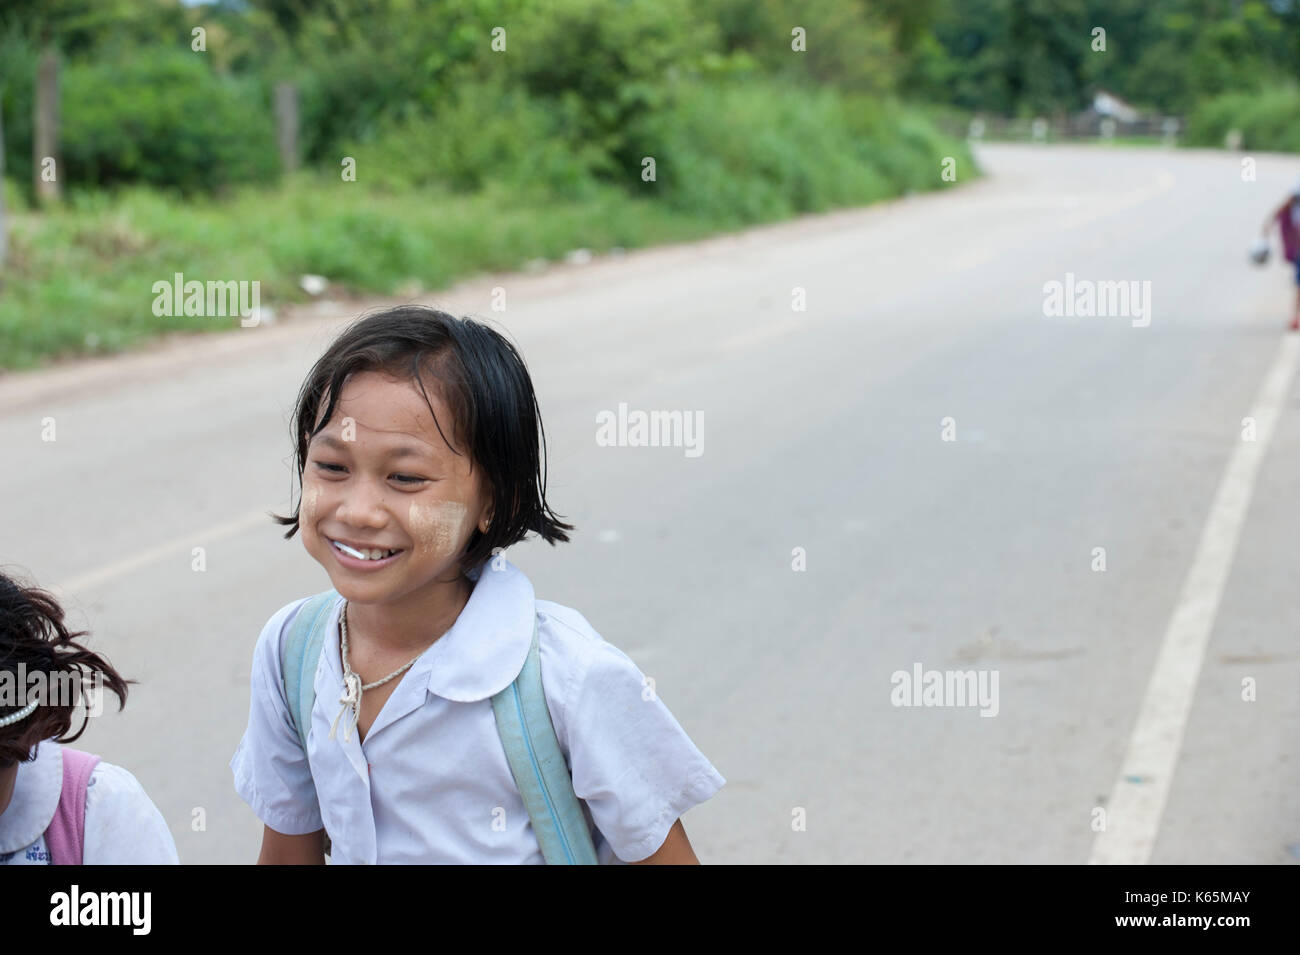 Burmese migrant children walk home from school near the dump site in the outskirts of Mae Sot, Thailand. Stock Photo